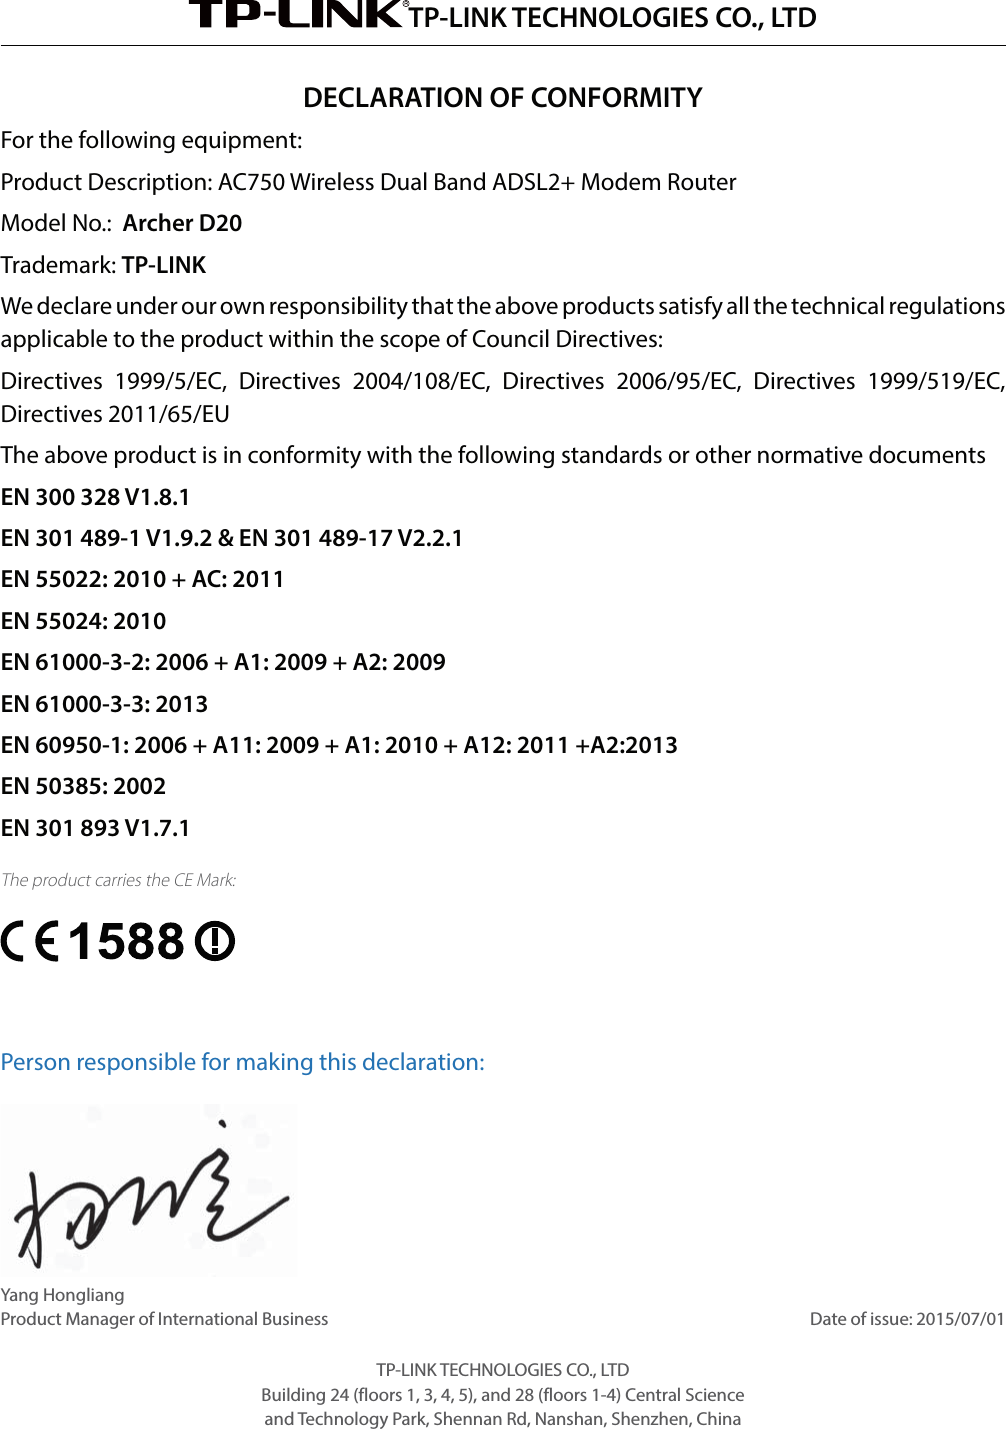 TP-LINK TECHNOLOGIES CO., LTDDECLARATION OF CONFORMITYFor the following equipment:Product Description: AC750 Wireless Dual Band ADSL2+ Modem RouterModel No.:  Archer D20Trademark: TP-LINKWe declare under our own responsibility that the above products satisfy all the technical regulations applicable to the product within the scope of Council Directives:  Directives 1999/5/EC, Directives 2004/108/EC, Directives 2006/95/EC, Directives 1999/519/EC, Directives 2011/65/EUThe above product is in conformity with the following standards or other normative documentsEN 300 328 V1.8.1  EN 301 489-1 V1.9.2 &amp; EN 301 489-17 V2.2.1  EN 55022: 2010 + AC: 2011  EN 55024: 2010  EN 61000-3-2: 2006 + A1: 2009 + A2: 2009  EN 61000-3-3: 2013  EN 60950-1: 2006 + A11: 2009 + A1: 2010 + A12: 2011 +A2:2013 EN 50385: 2002  EN 301 893 V1.7.1The product carries the CE Mark: Person responsible for making this declaration:Yang HongliangProduct Manager of International Business                                                                                                                                   Date of issue: 2015/07/01TP-LINK TECHNOLOGIES CO., LTDBuilding 24 (floors 1, 3, 4, 5), and 28 (floors 1-4) Central Science and Technology Park, Shennan Rd, Nanshan, Shenzhen, China